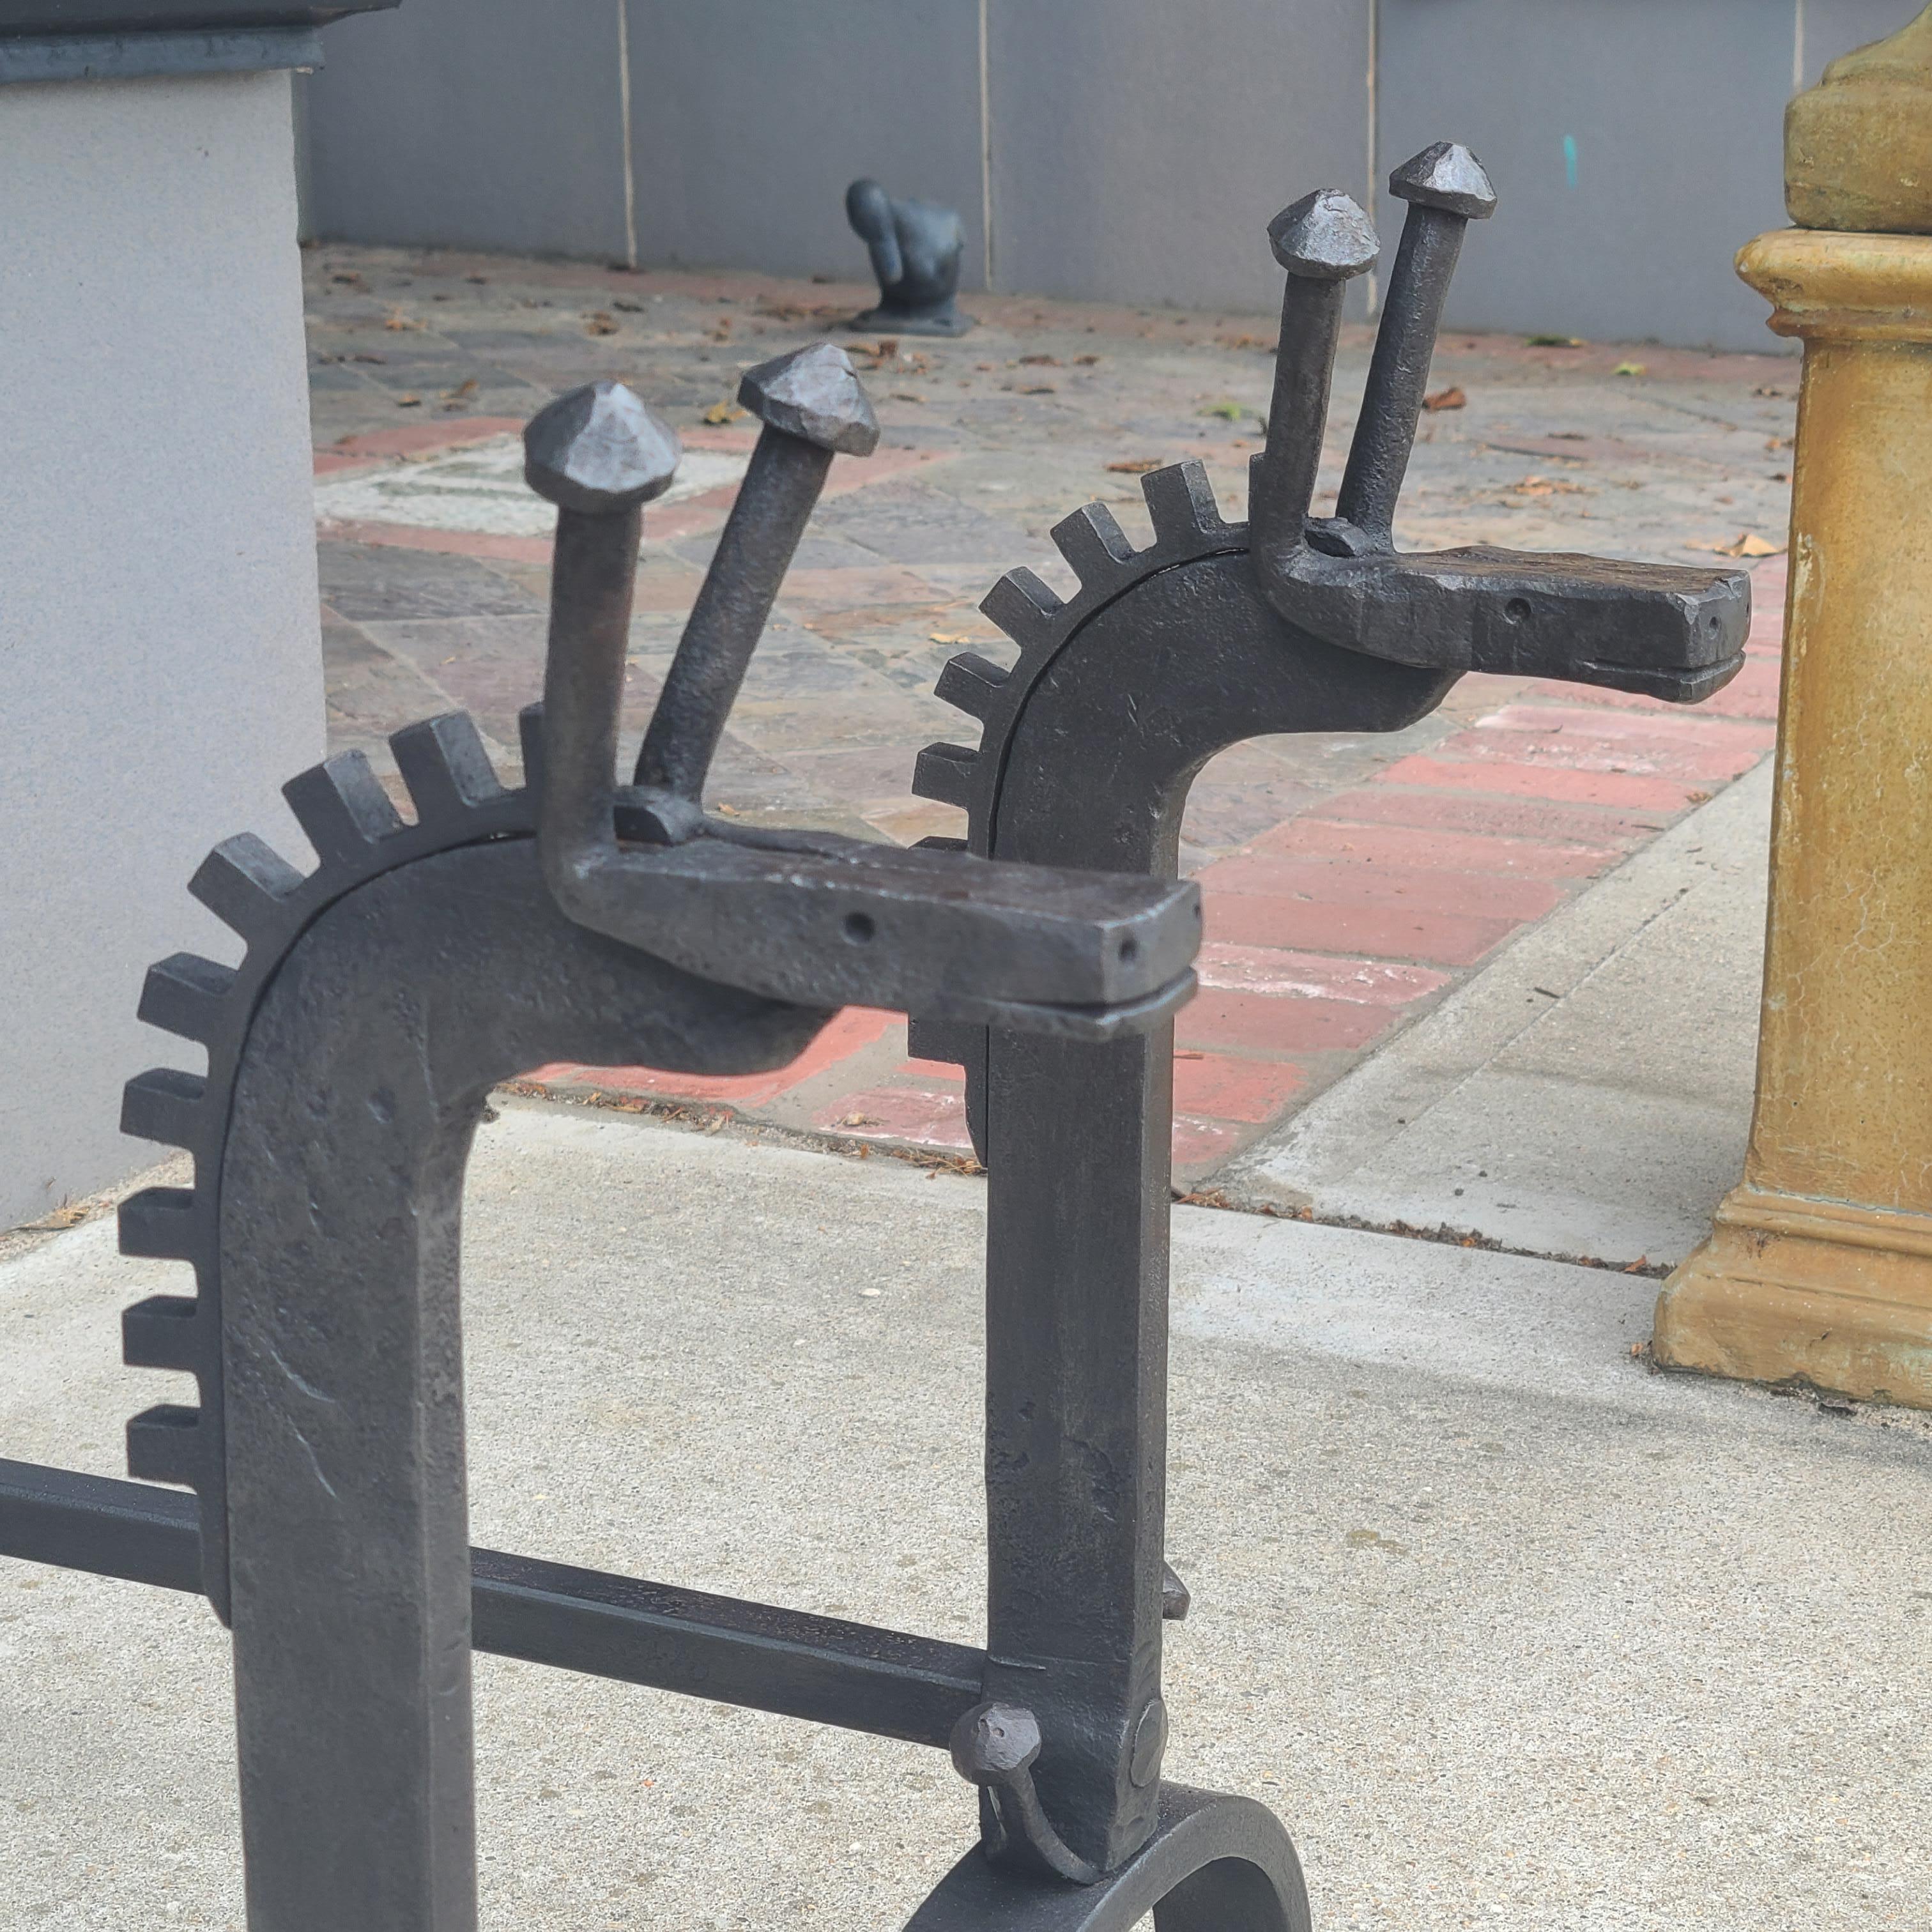 A whimsical pair of hand forged andirons made to look like a stylized giraffe, they are a nice balance of folk art, craft and modern design. A truly unique and one of a kind set of andirons.